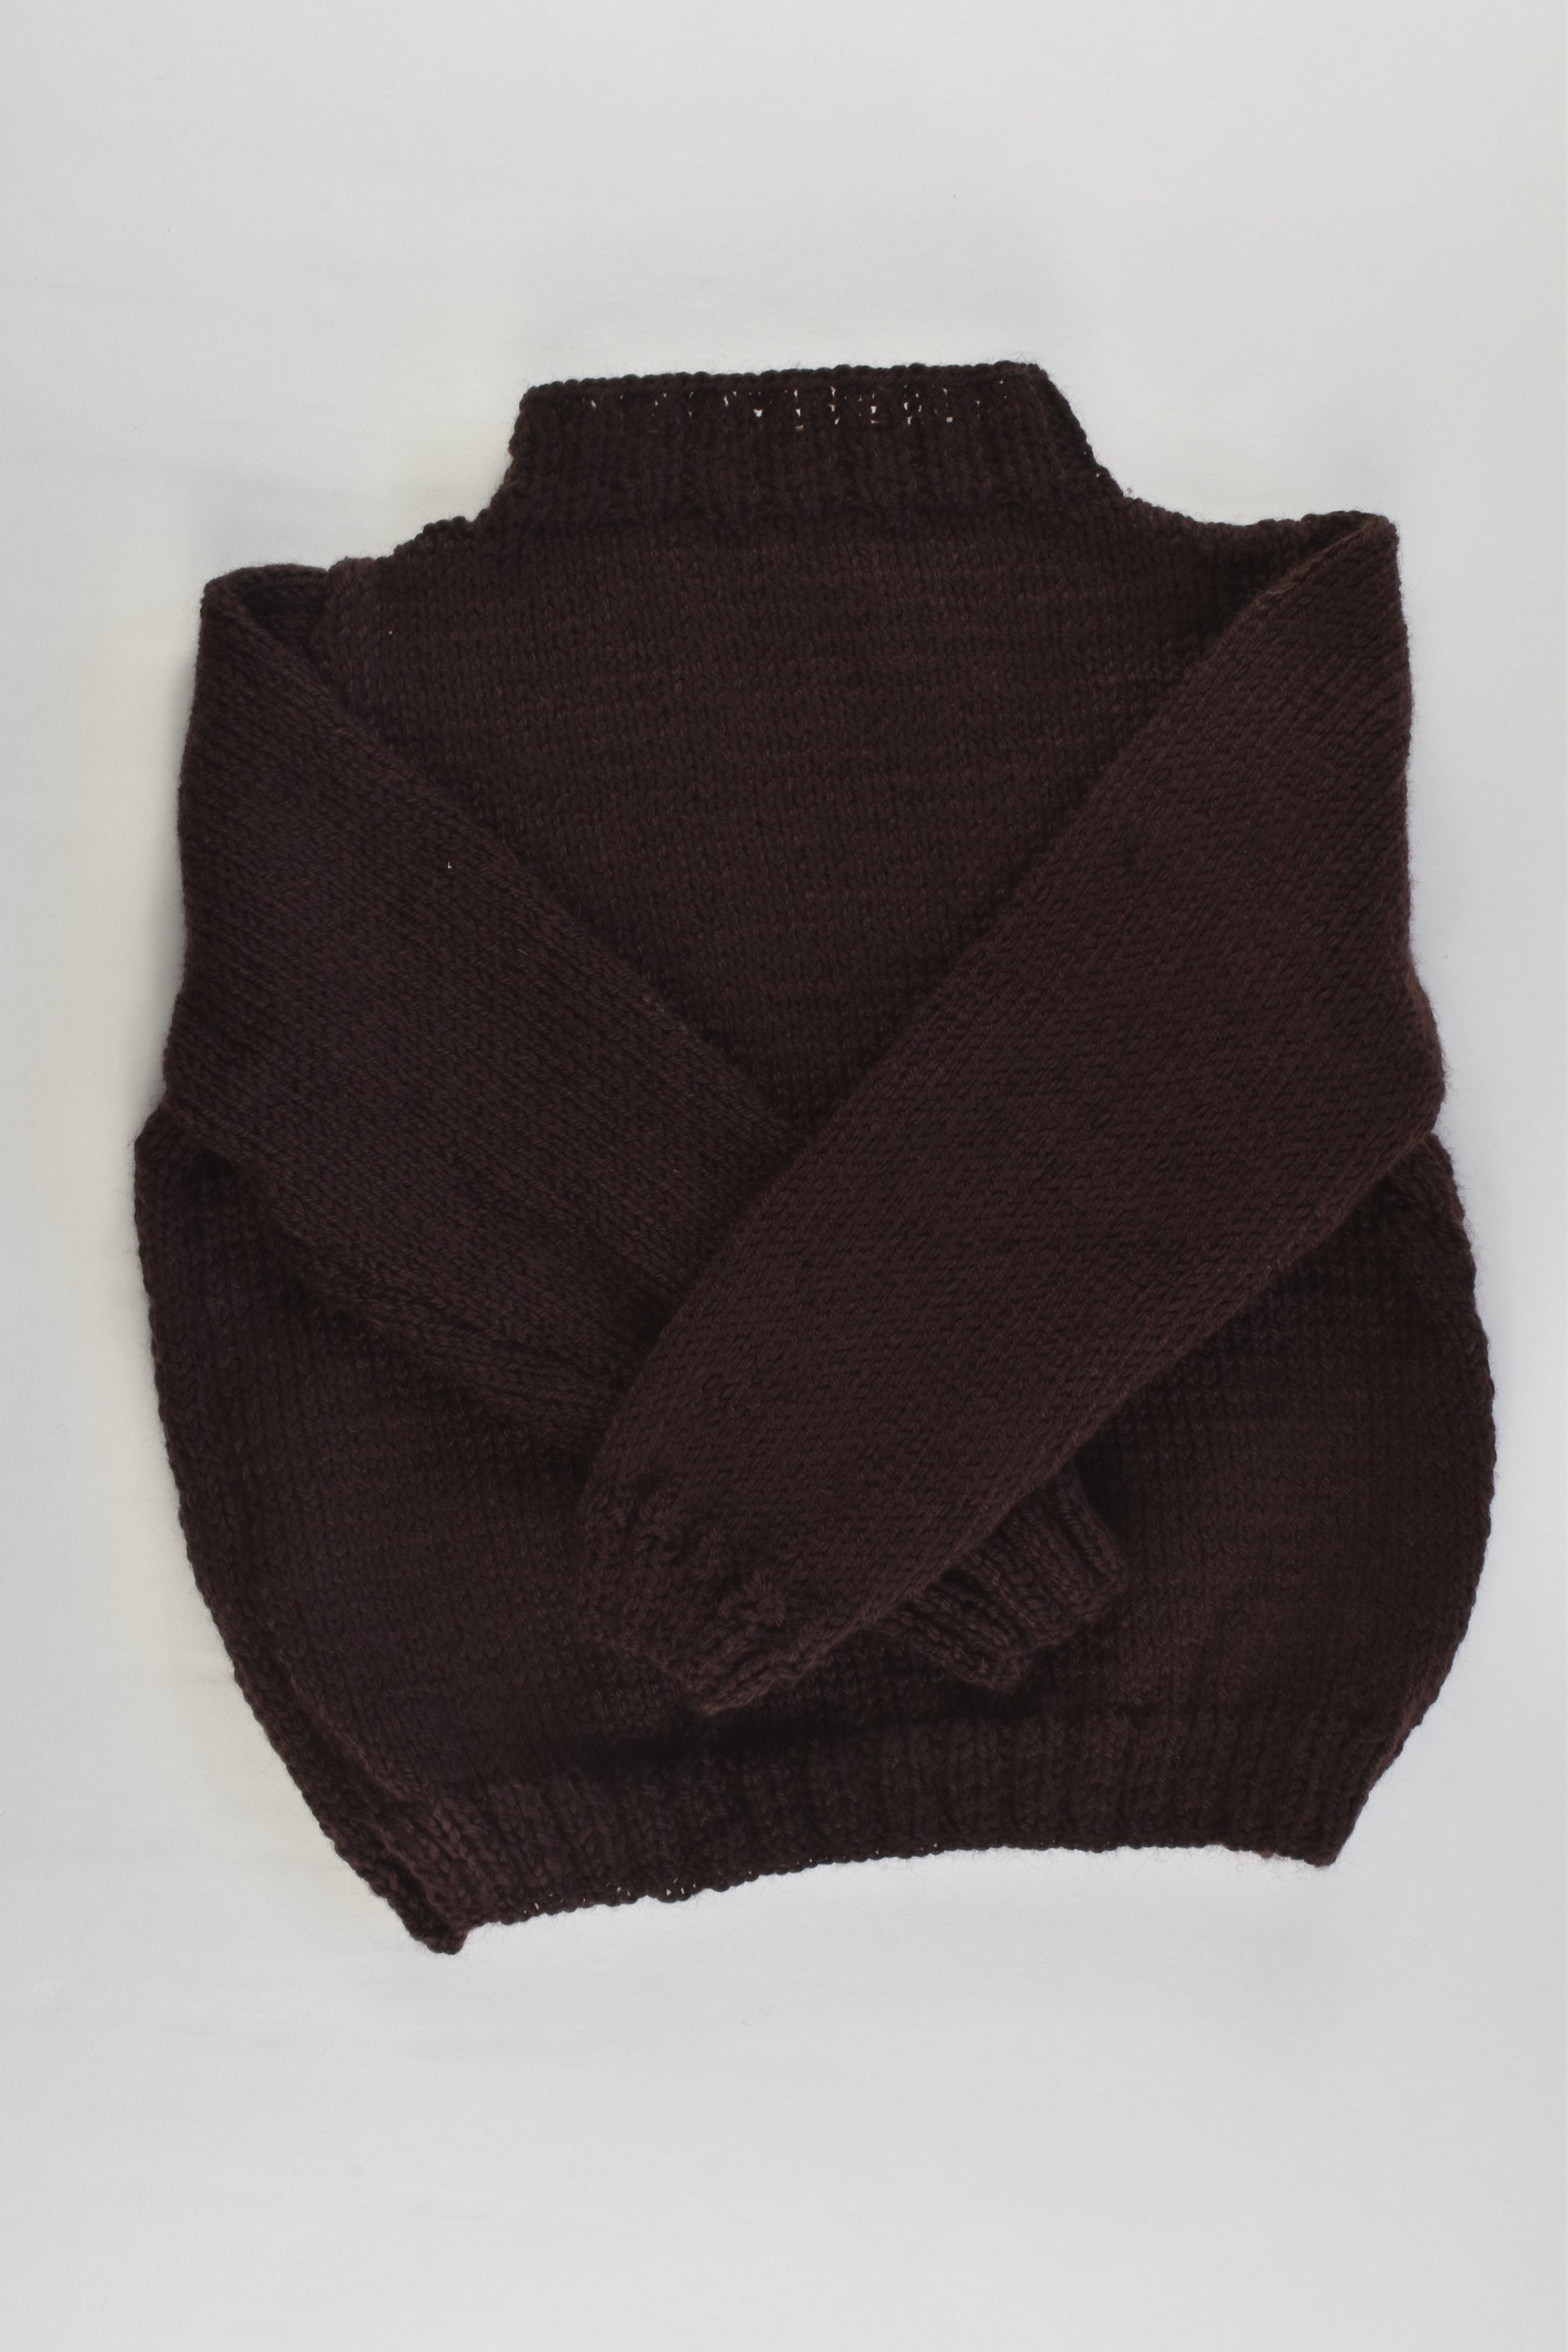 NEW Handmade Size approx 2 Brown Knitted Jumper